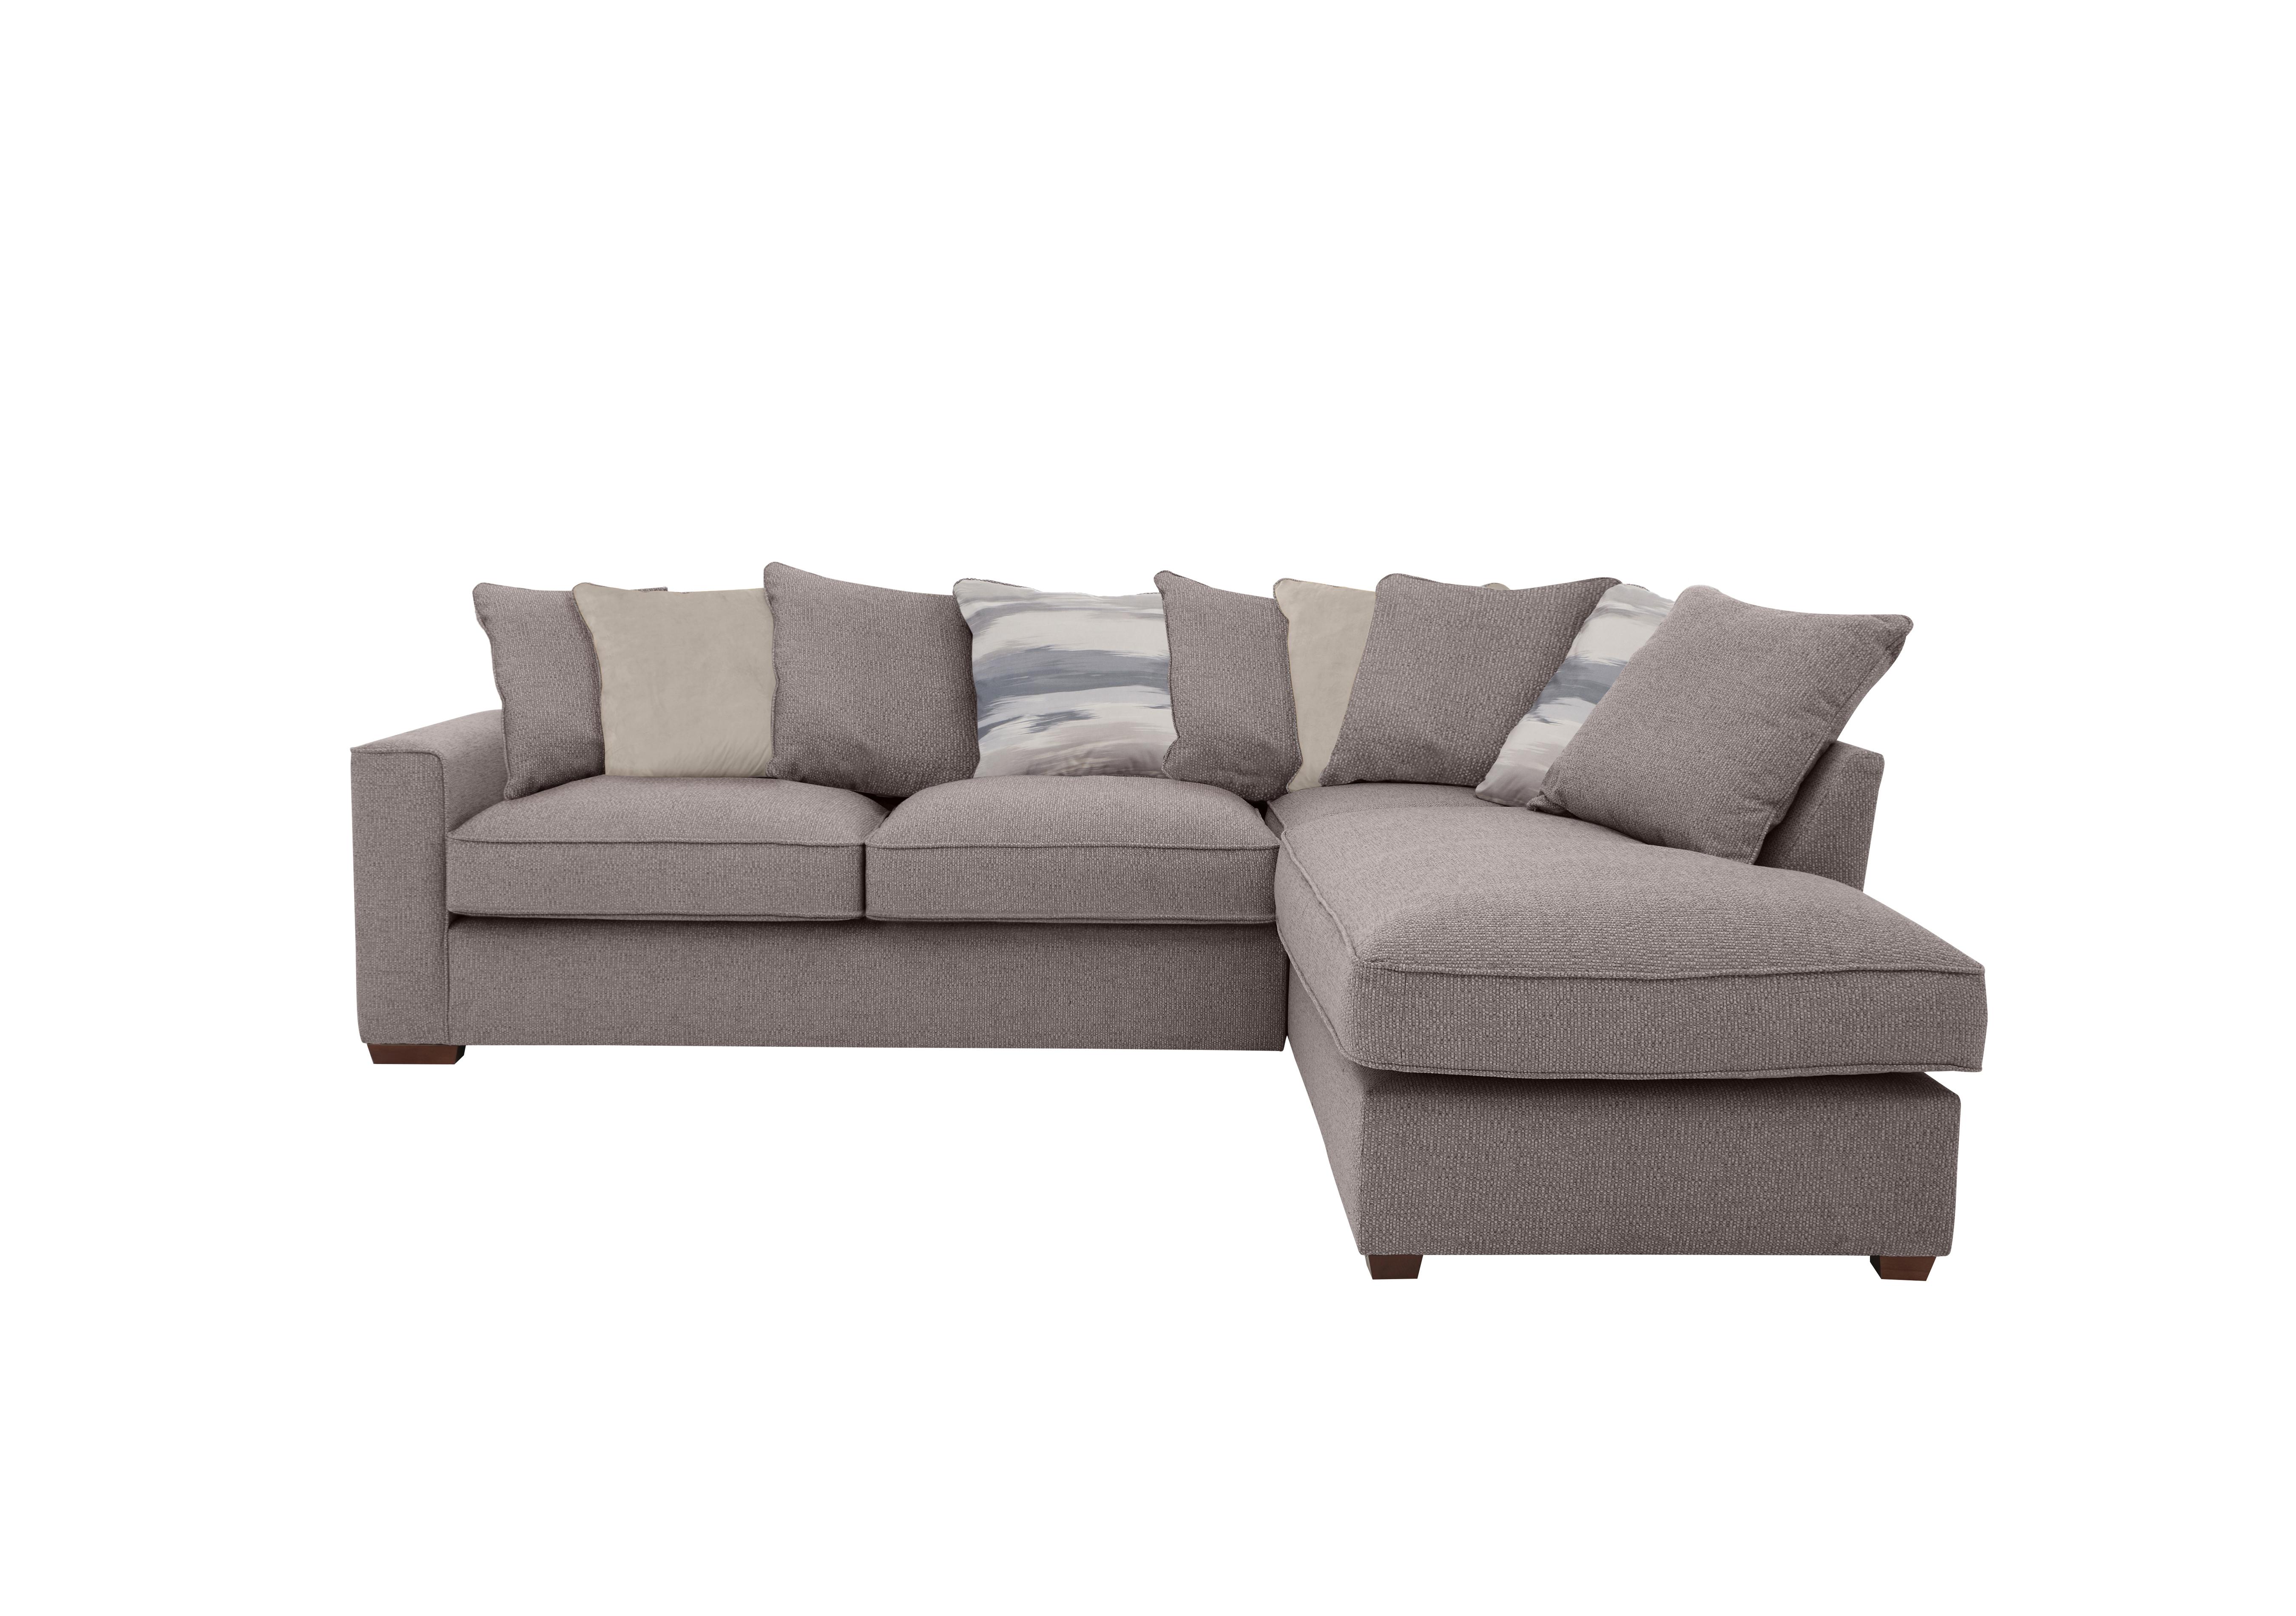 Cory Fabric Corner Chaise Scatter Back Sofa in Dallas Taupe Taupe Pack on Furniture Village